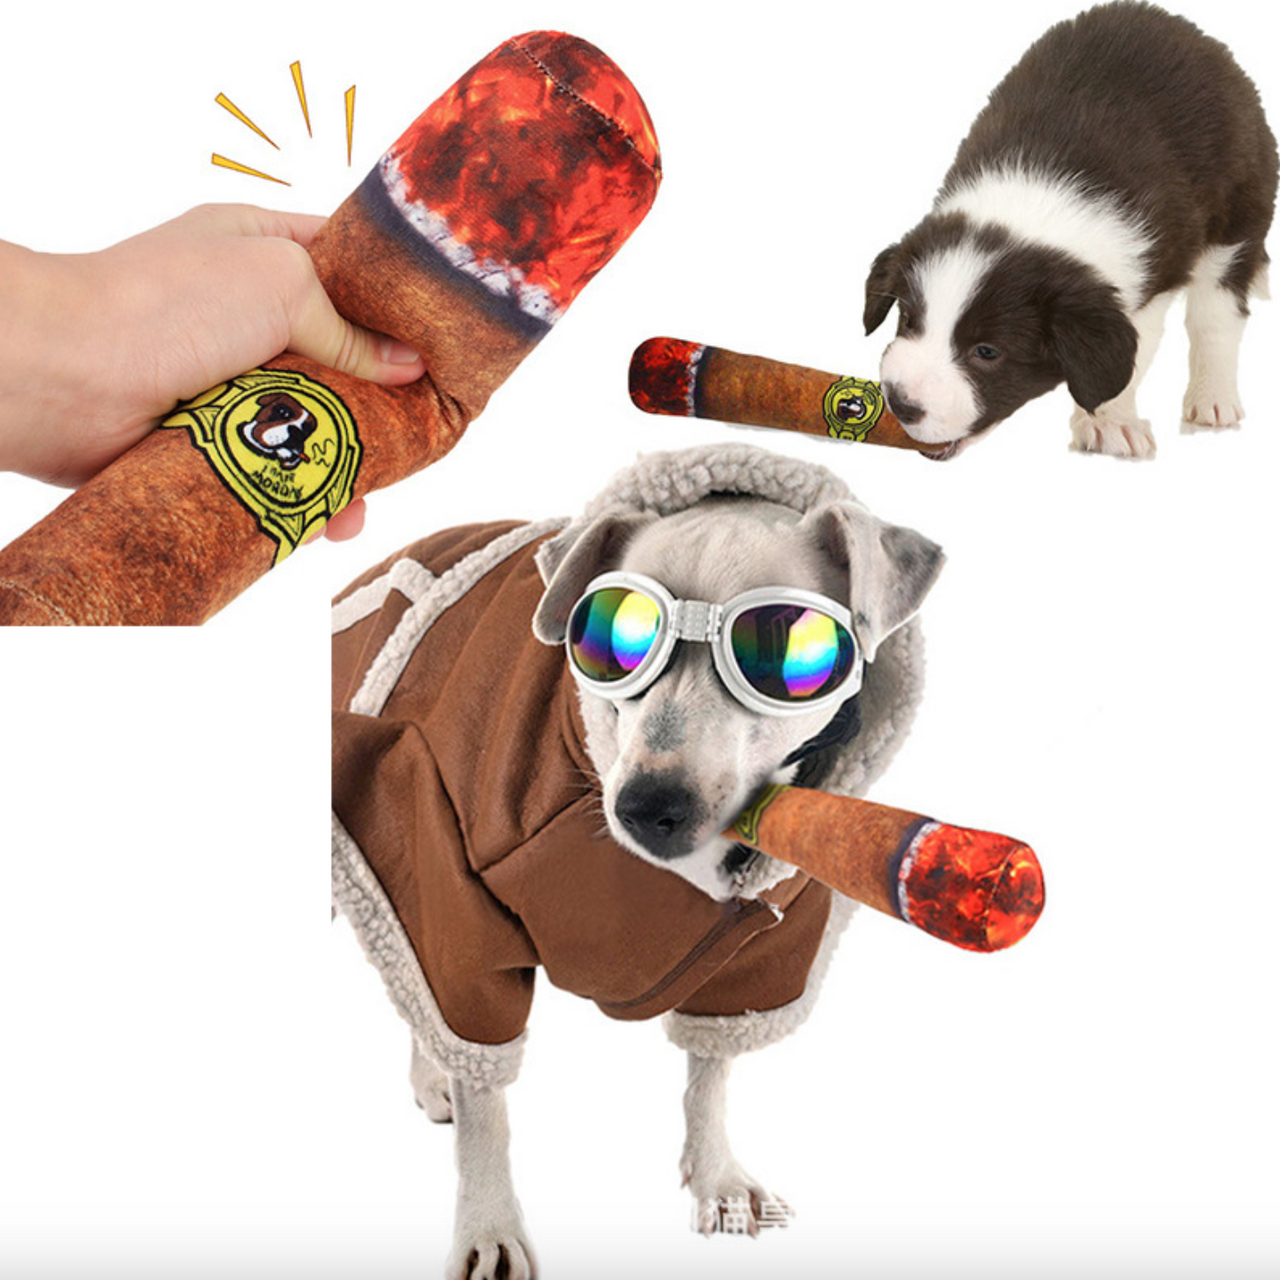 Interactive Cigar-shaped pet chewing toy for teasing dogs, Dog Toy JonxiFon